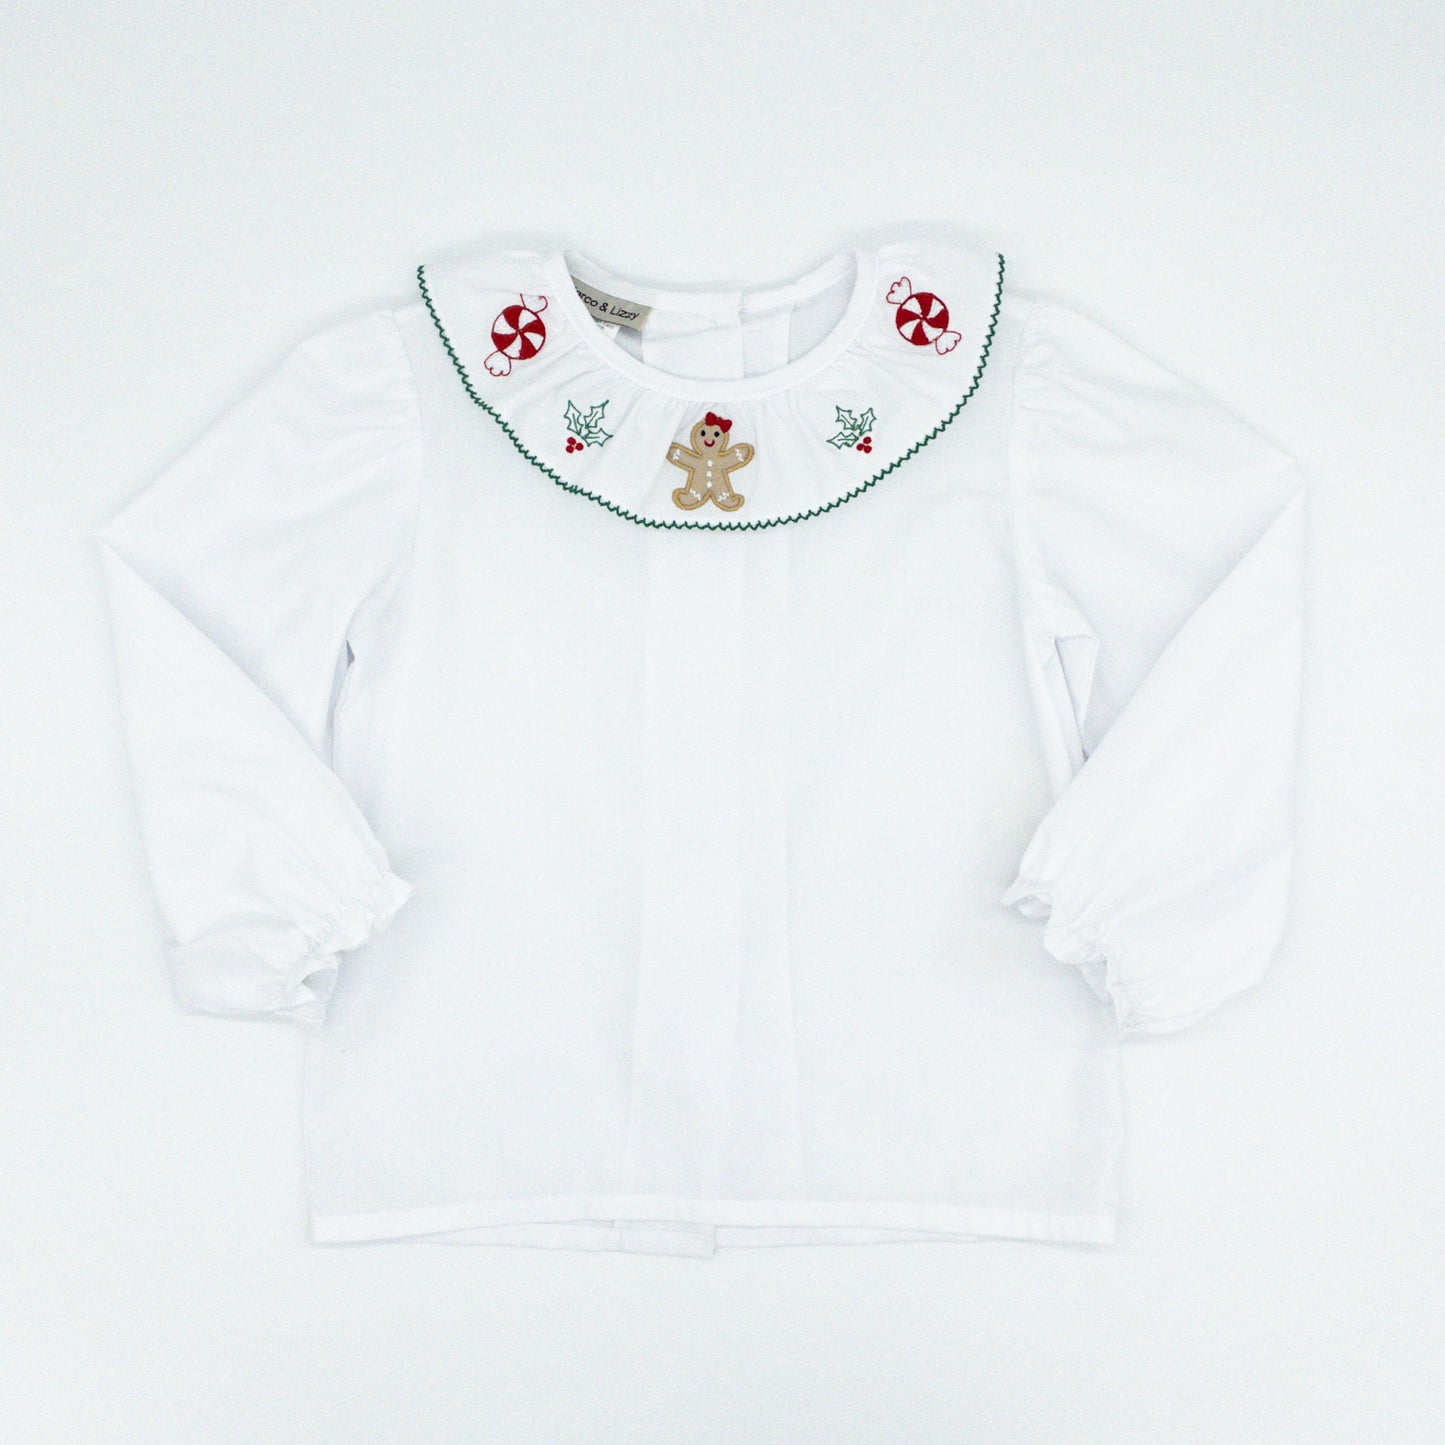 Ruffle Collared Blouse with Gingerbread Embroidery - FINAL SALE